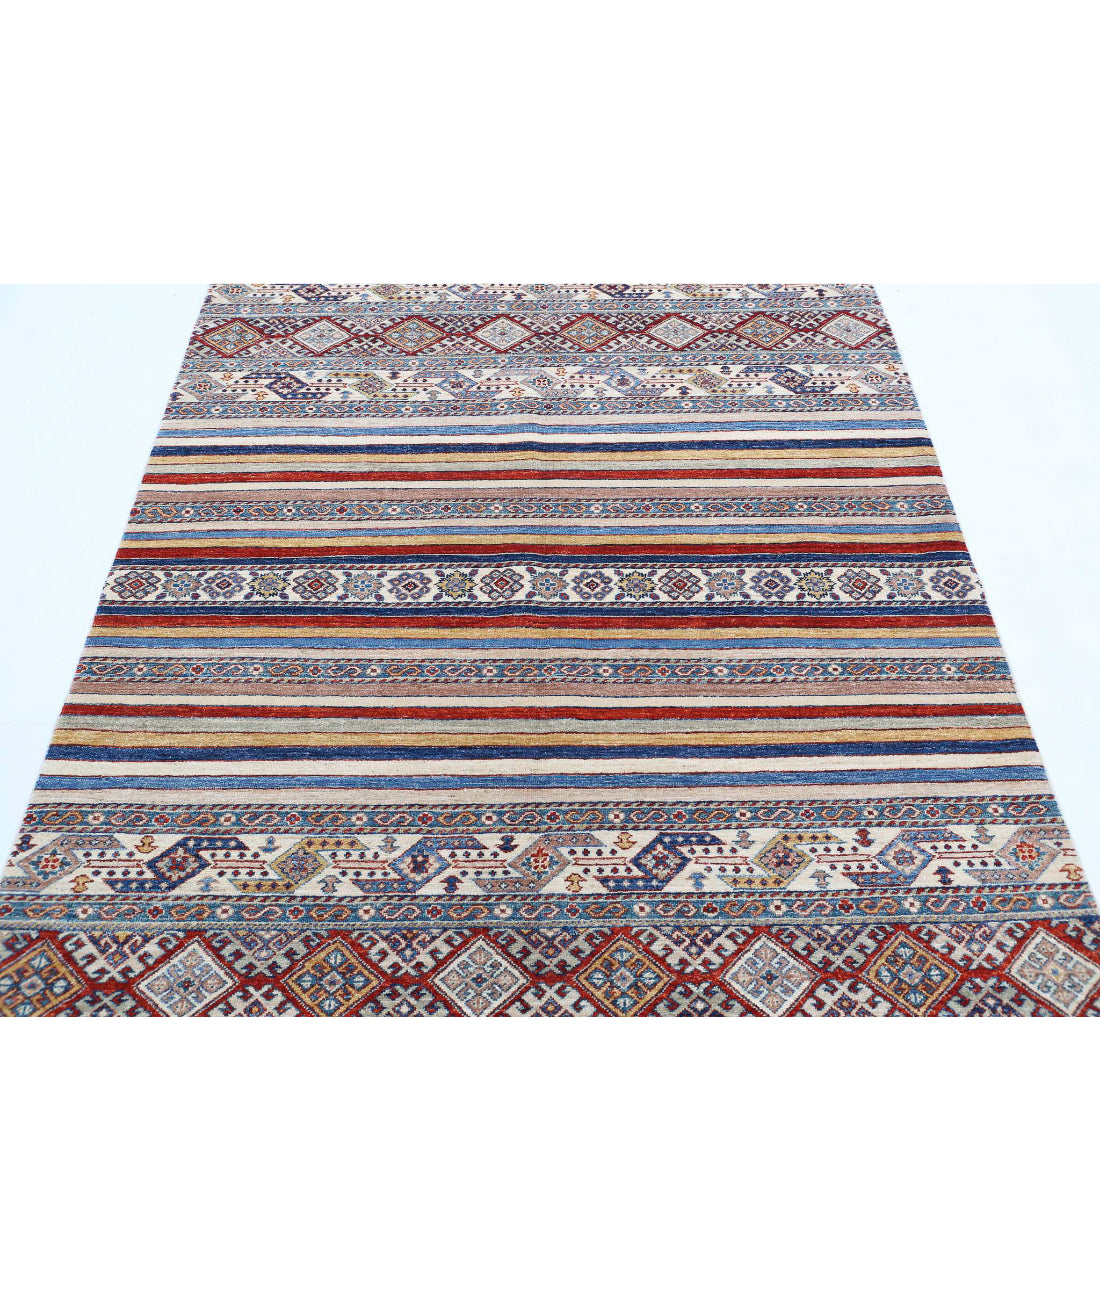 Hand Knotted Khurjeen Wool Rug - 4'10'' x 6'3'' 4'10'' x 6'3'' (145 X 188) / Multi / Multi